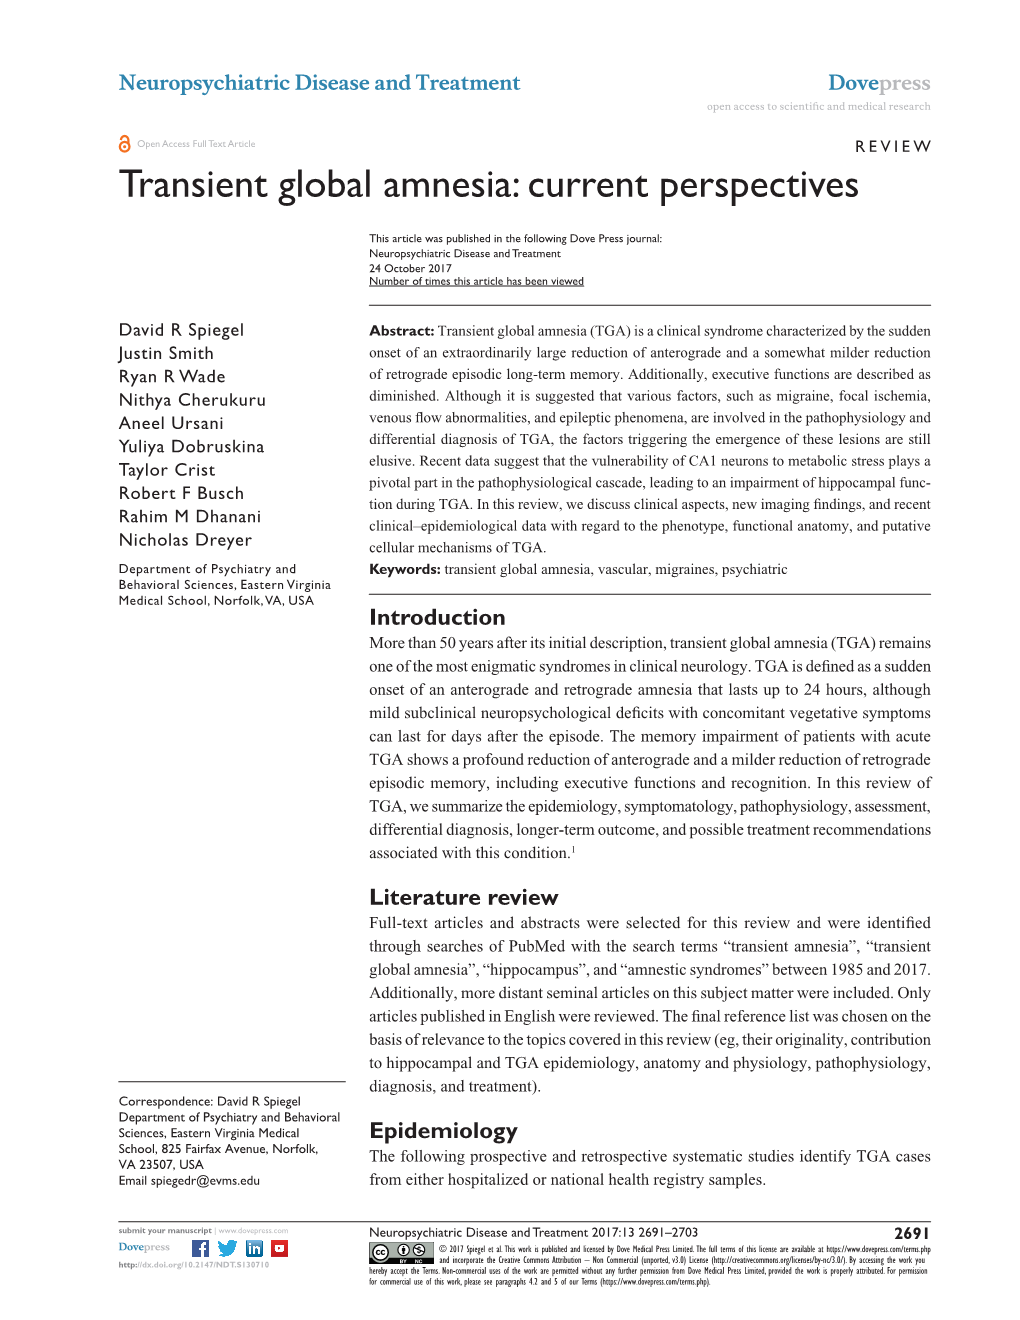 Transient Global Amnesia: Current Perspectives